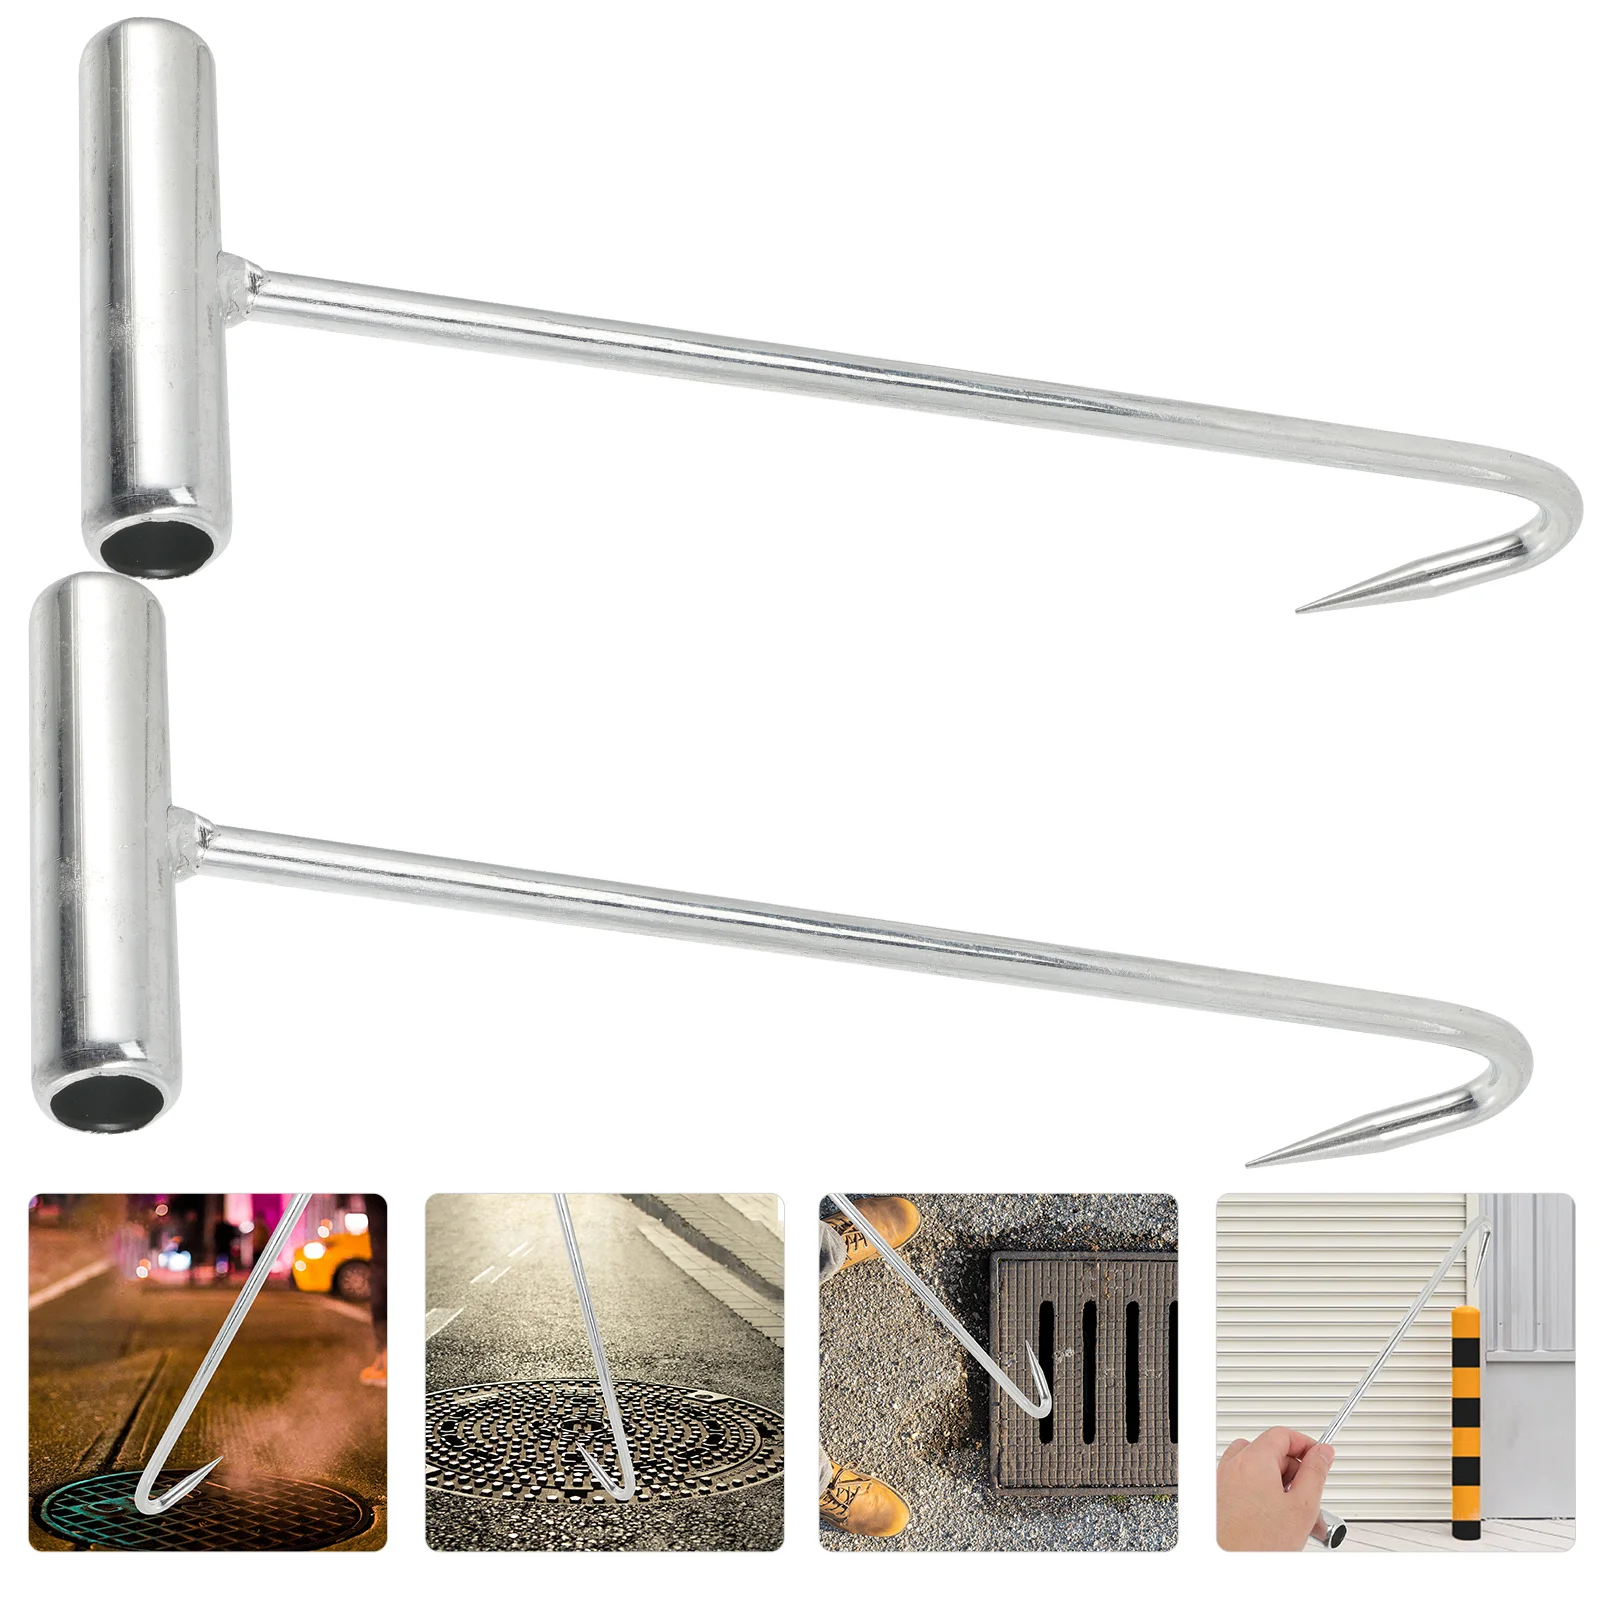 

2 Pcs Pull Hook Bed Rails Iron Lifter Manhole Stainless Steel Hooks For Holes Cover Lifting Tool Well Shaped